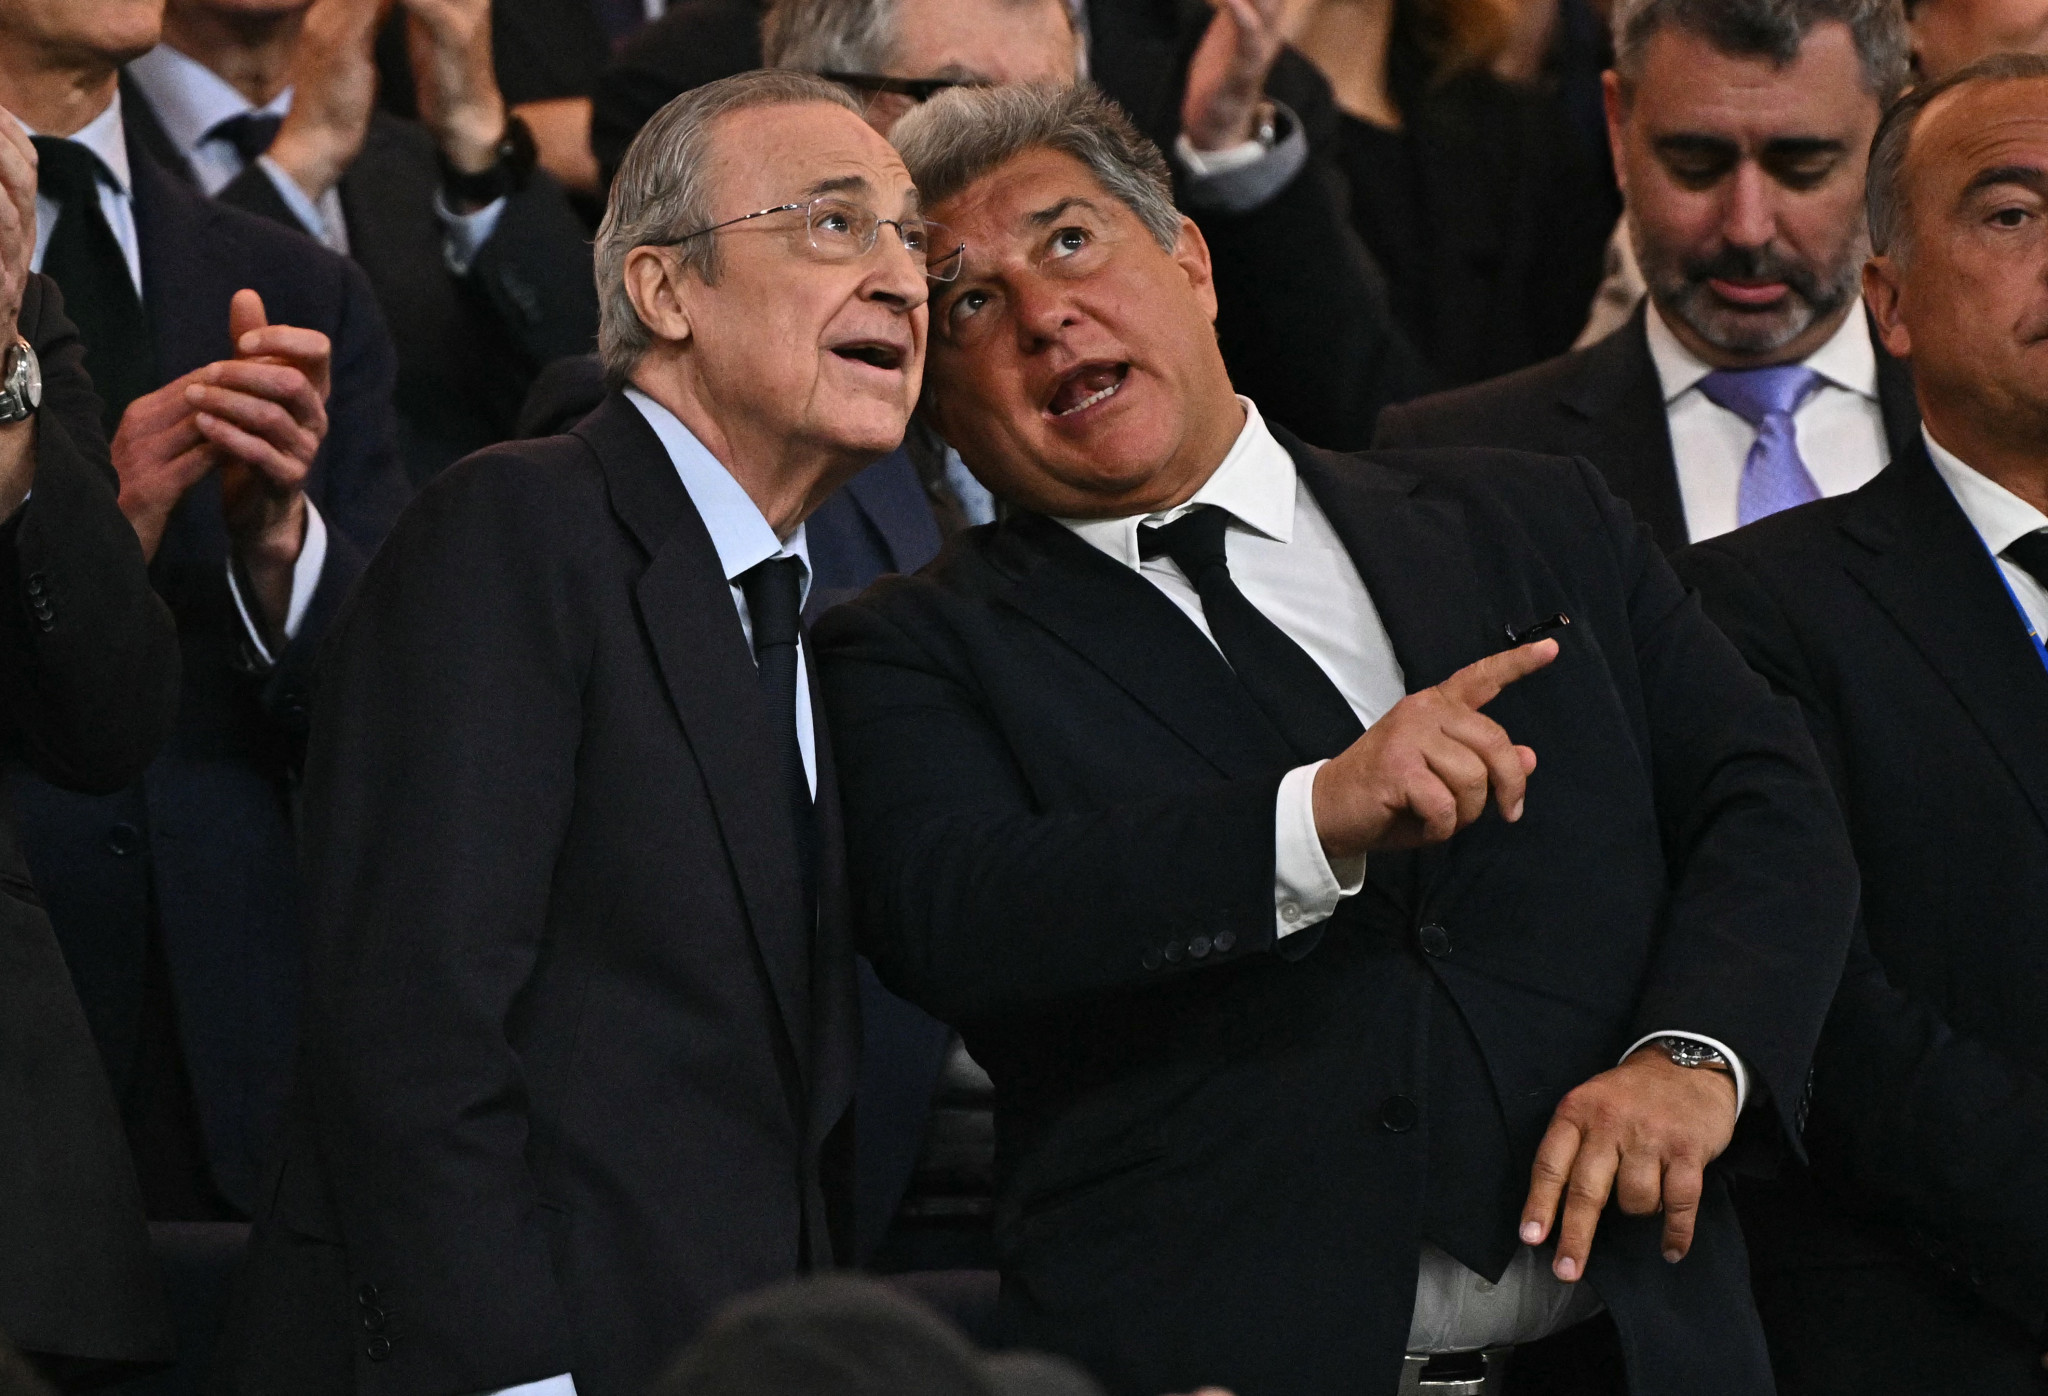 Barcelona president Joan Laporta (R) together with and Real Madrid president Florentino Pérez. GETTY IMAGES